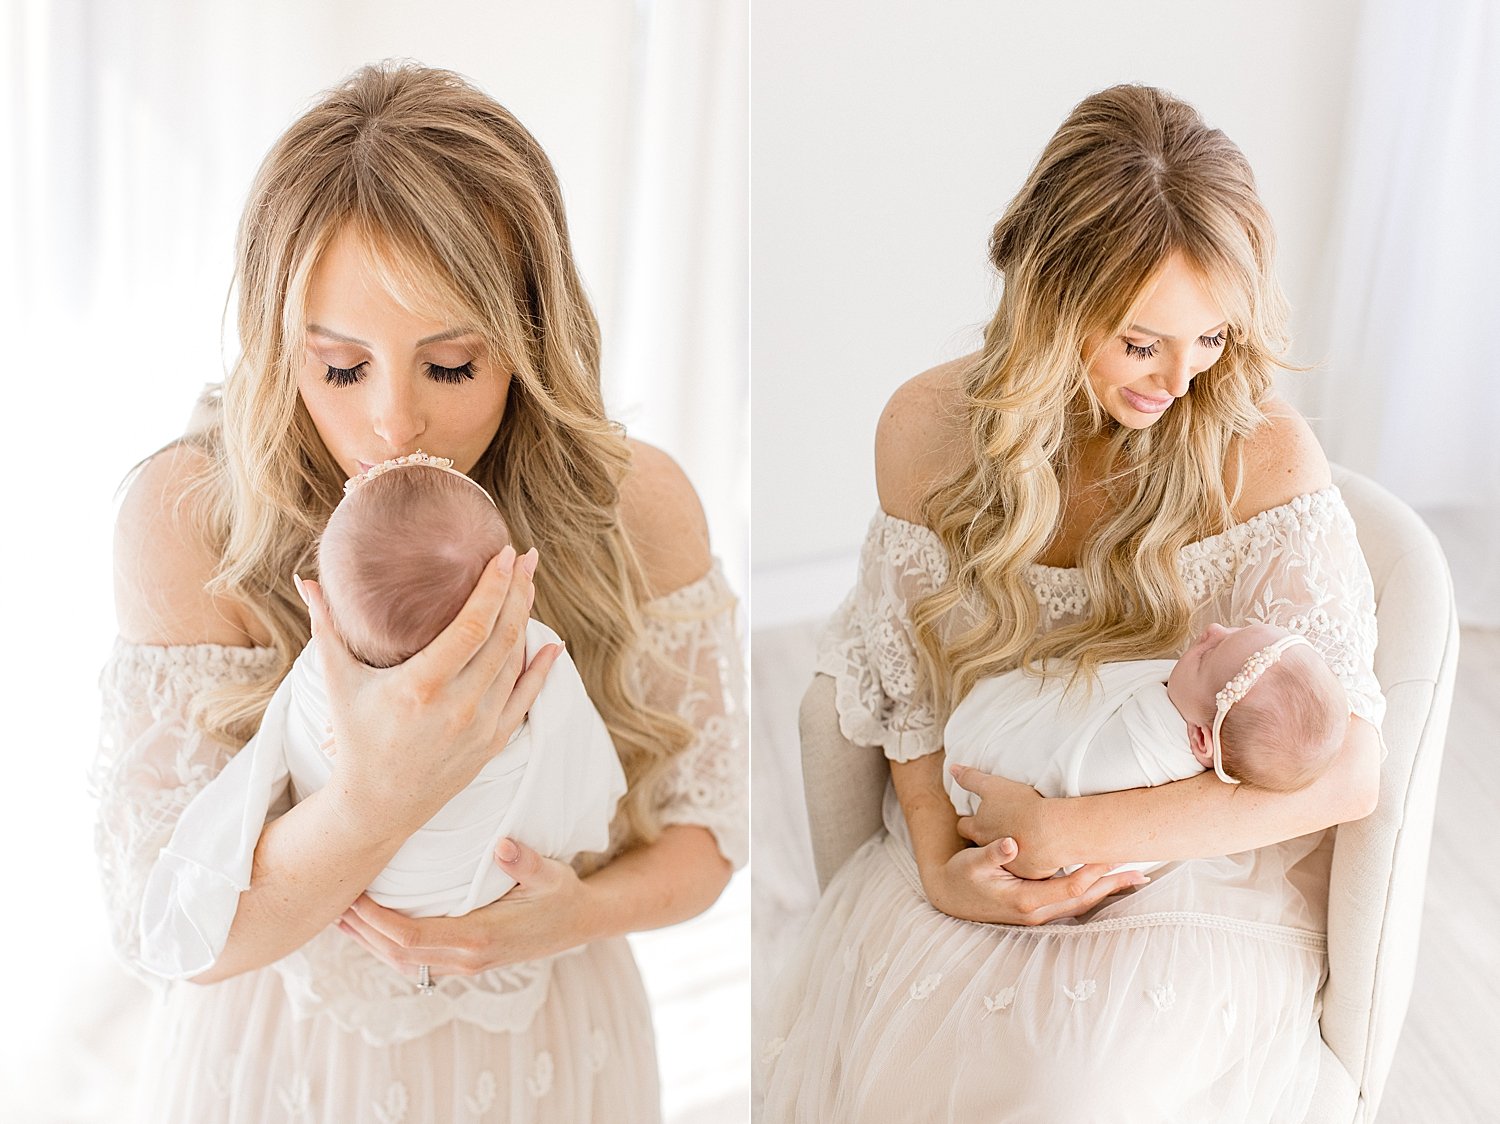 Mom snuggling her baby girl | Ambre Williams Photography